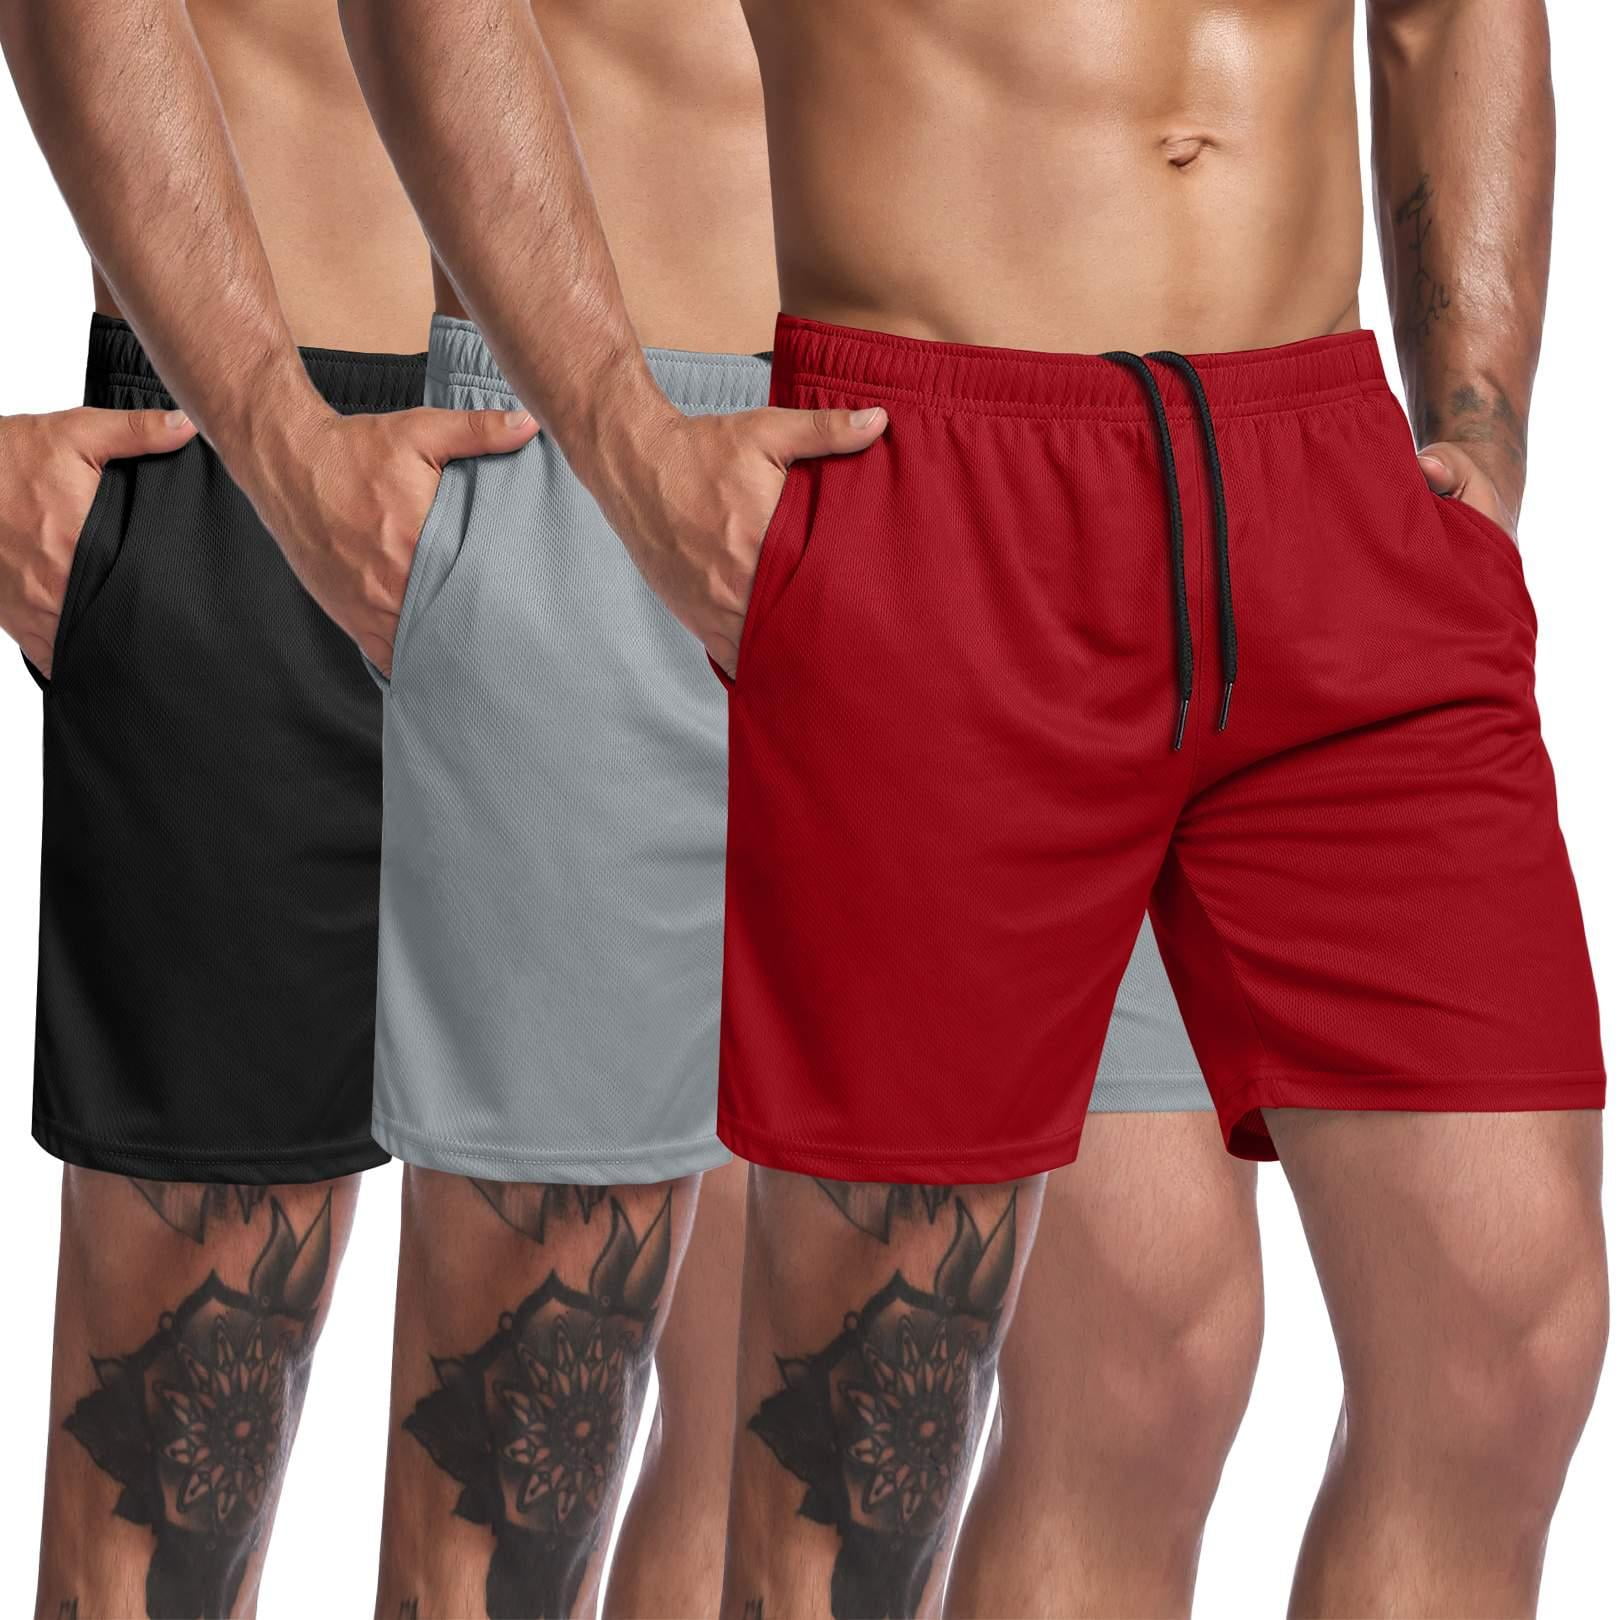 COOFANDY Men's 3 Pack Gym Workout Shorts Mesh Weightlifting Squatting Pants Training Bodybuilding Jogger with Pocket 